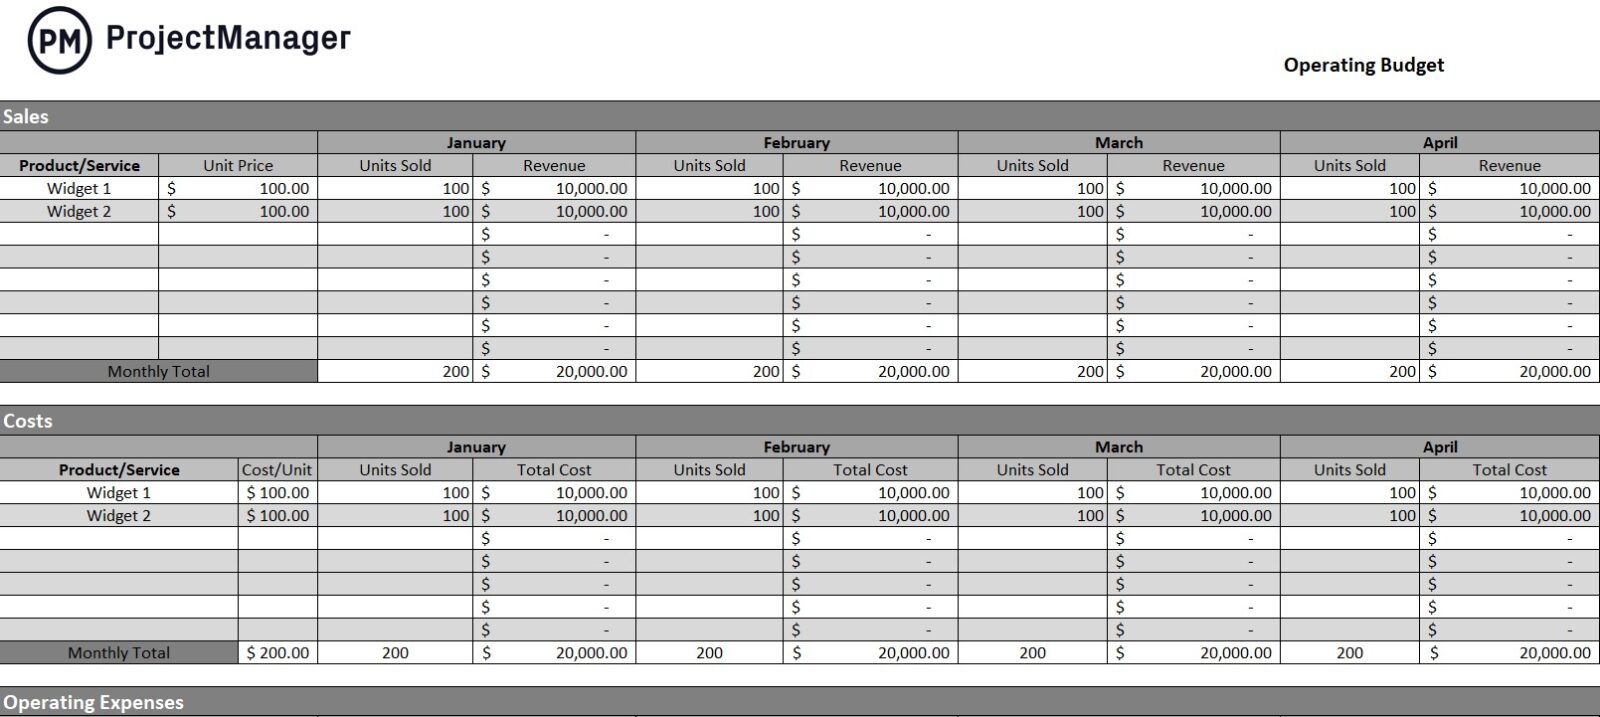 Operating Budget Template for Excel (Free Download)